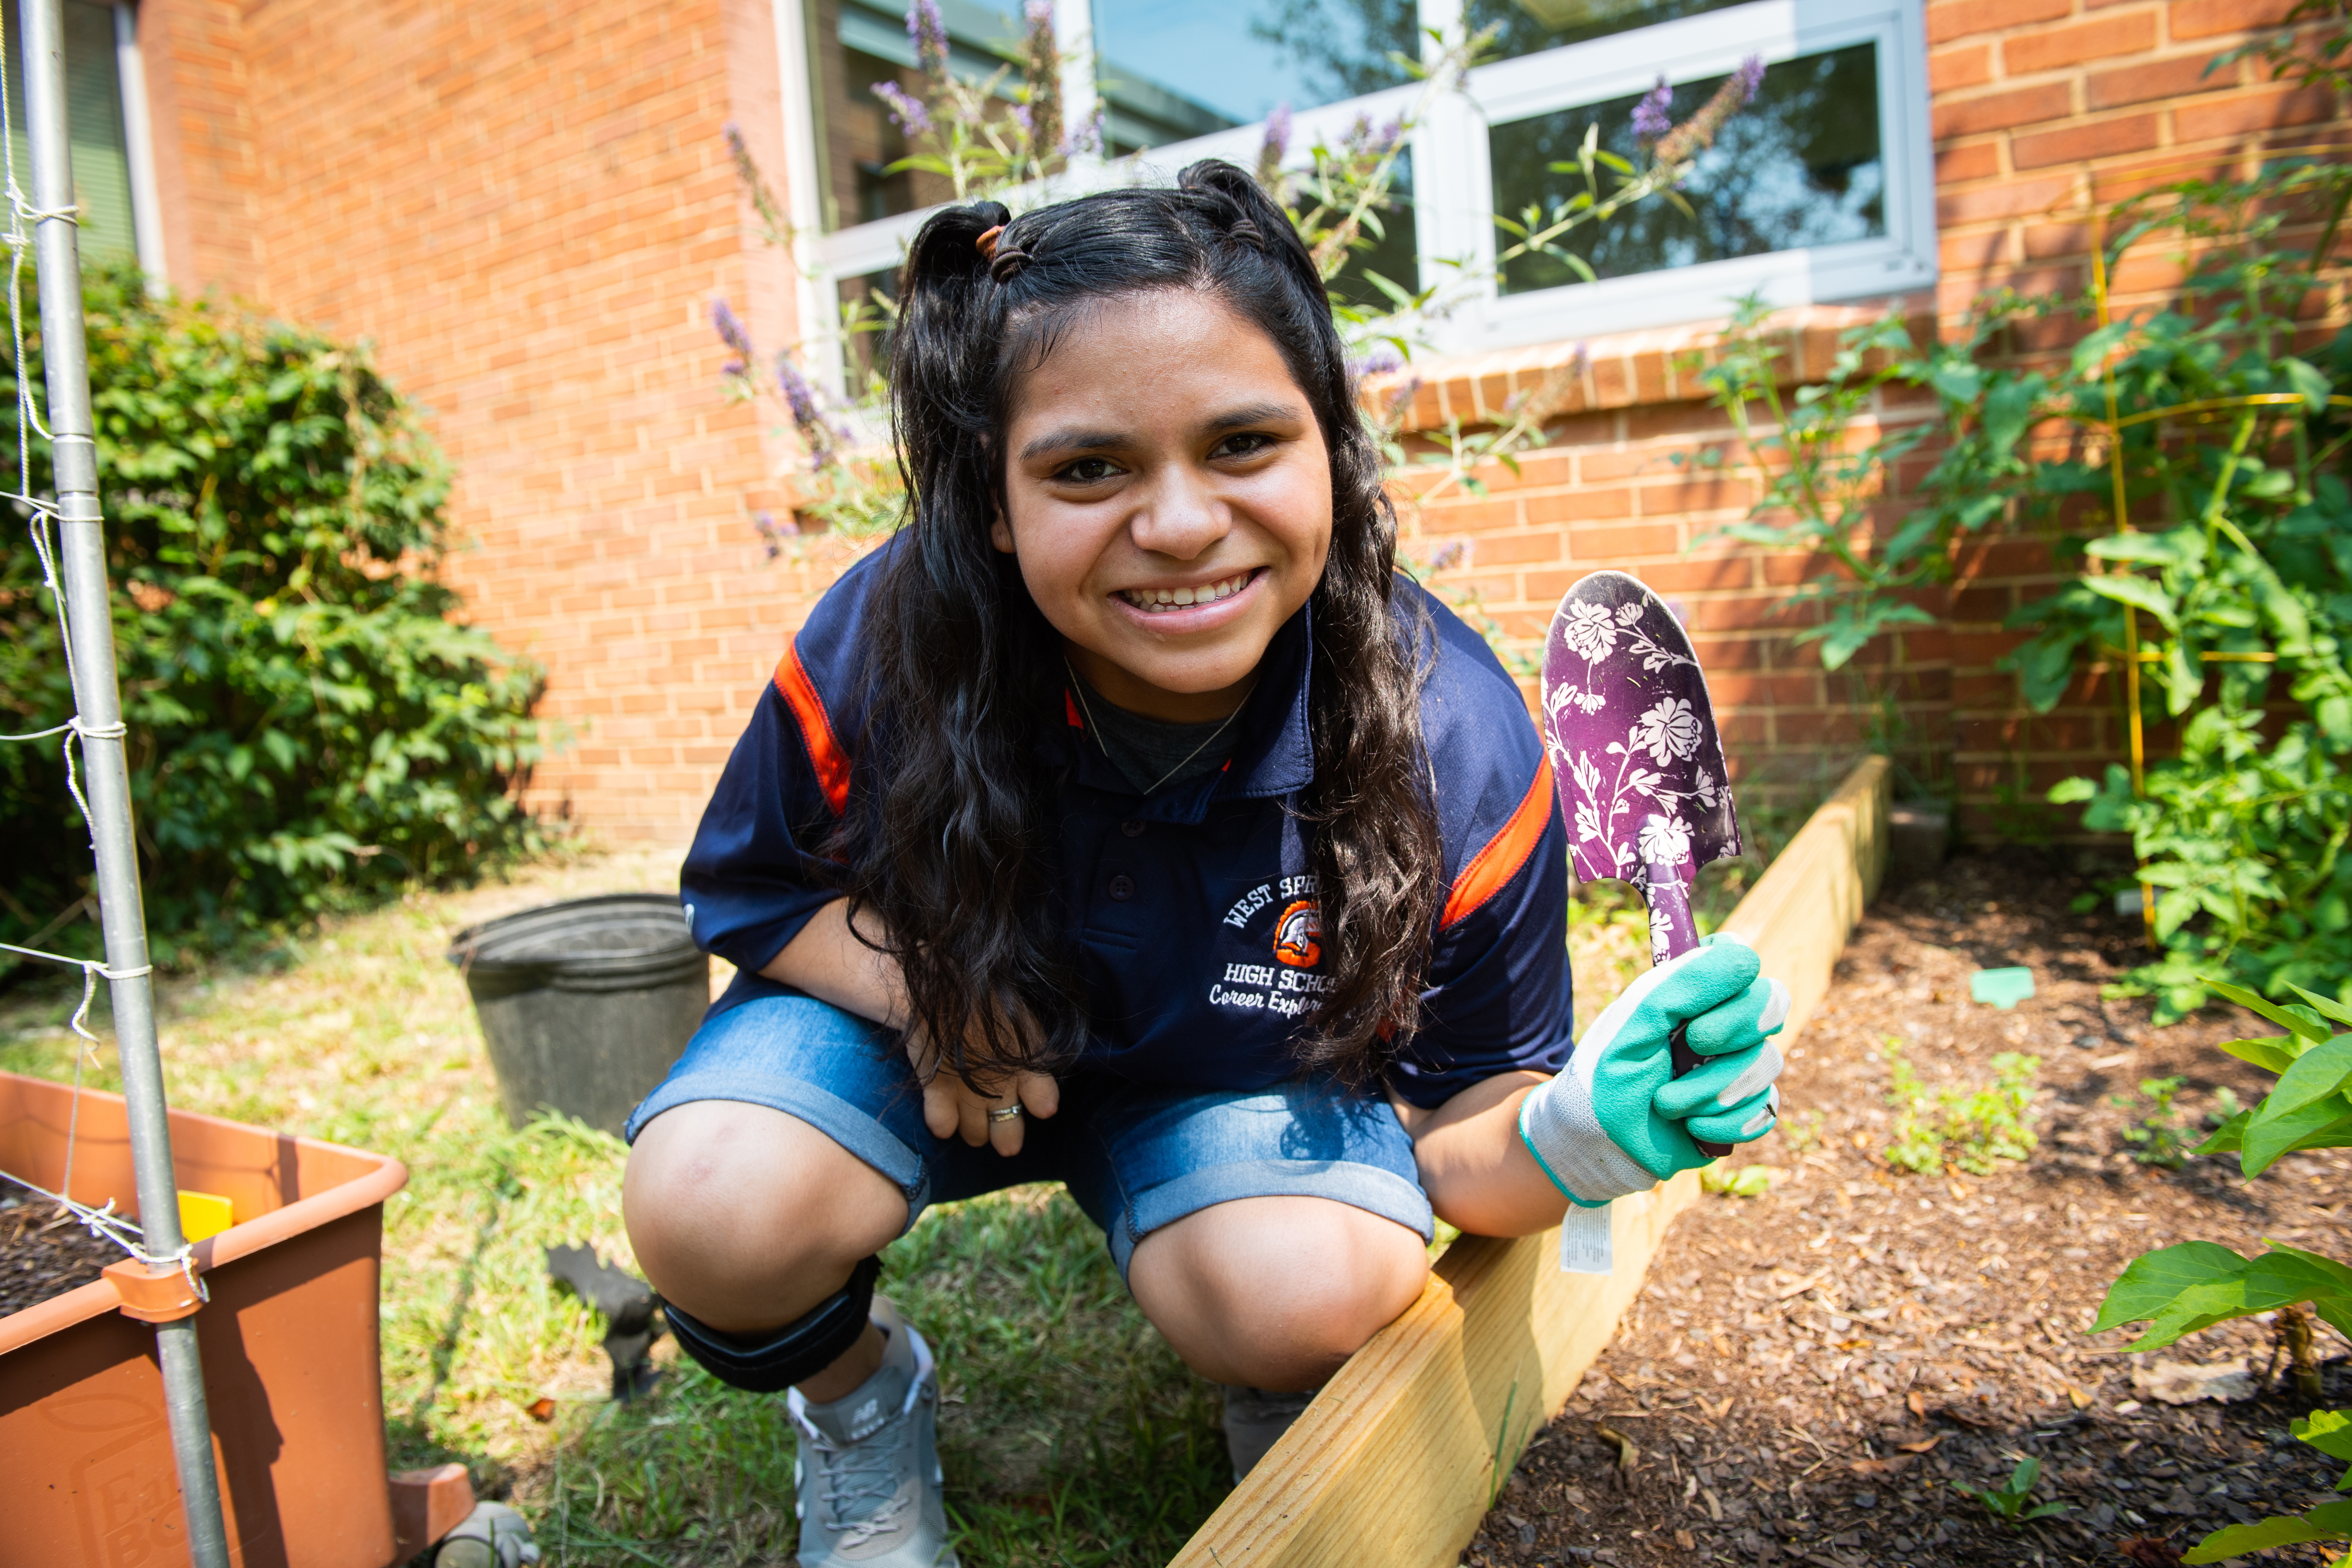 A female student tends to a flower bed.